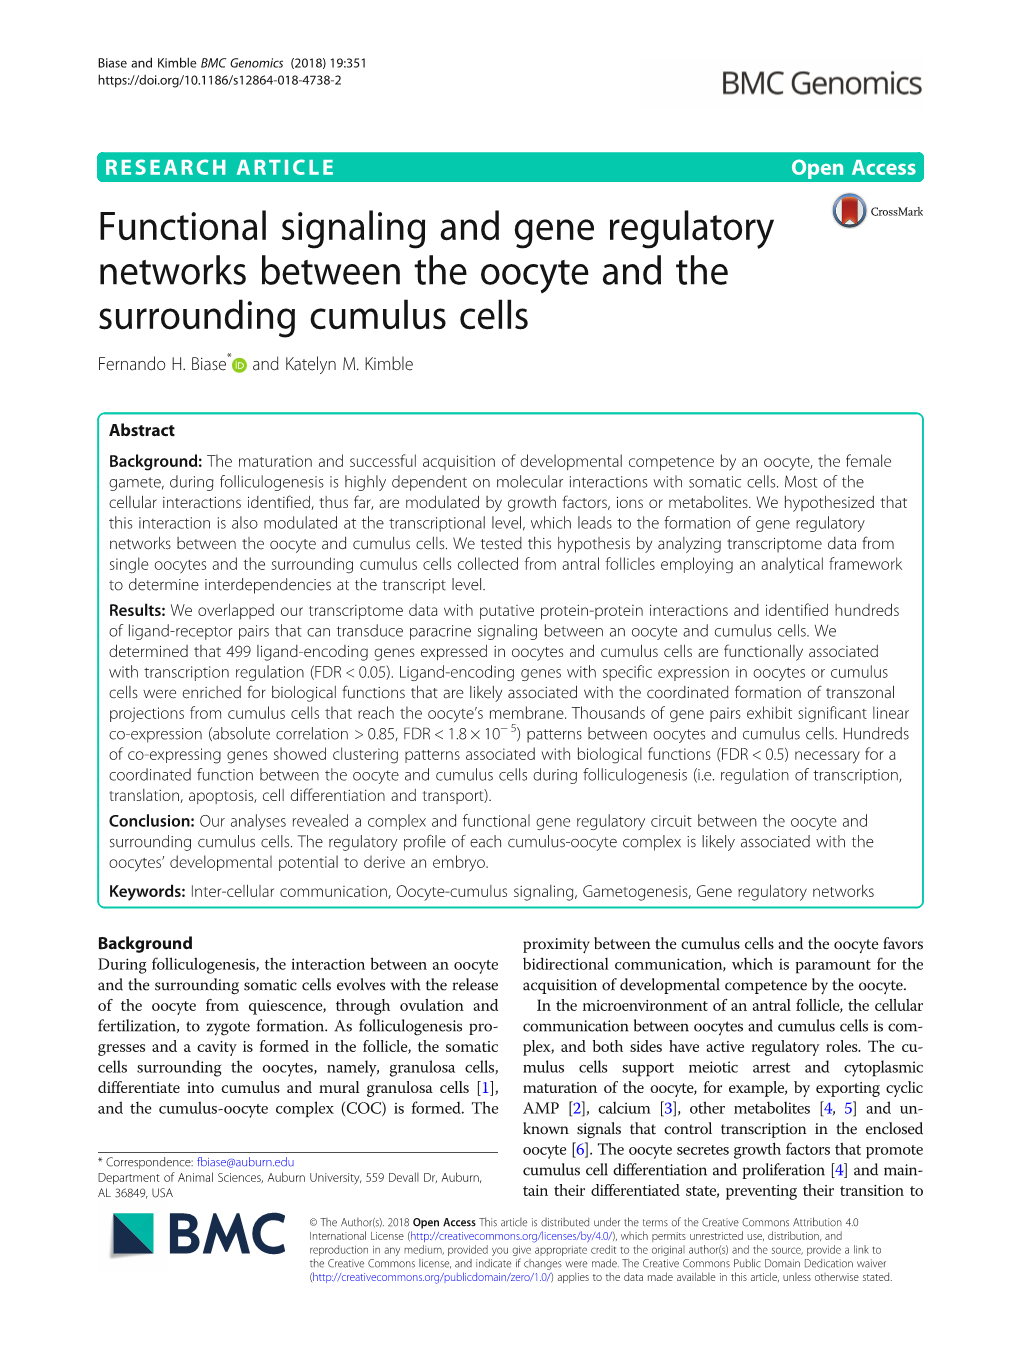 Functional Signaling and Gene Regulatory Networks Between the Oocyte and the Surrounding Cumulus Cells Fernando H